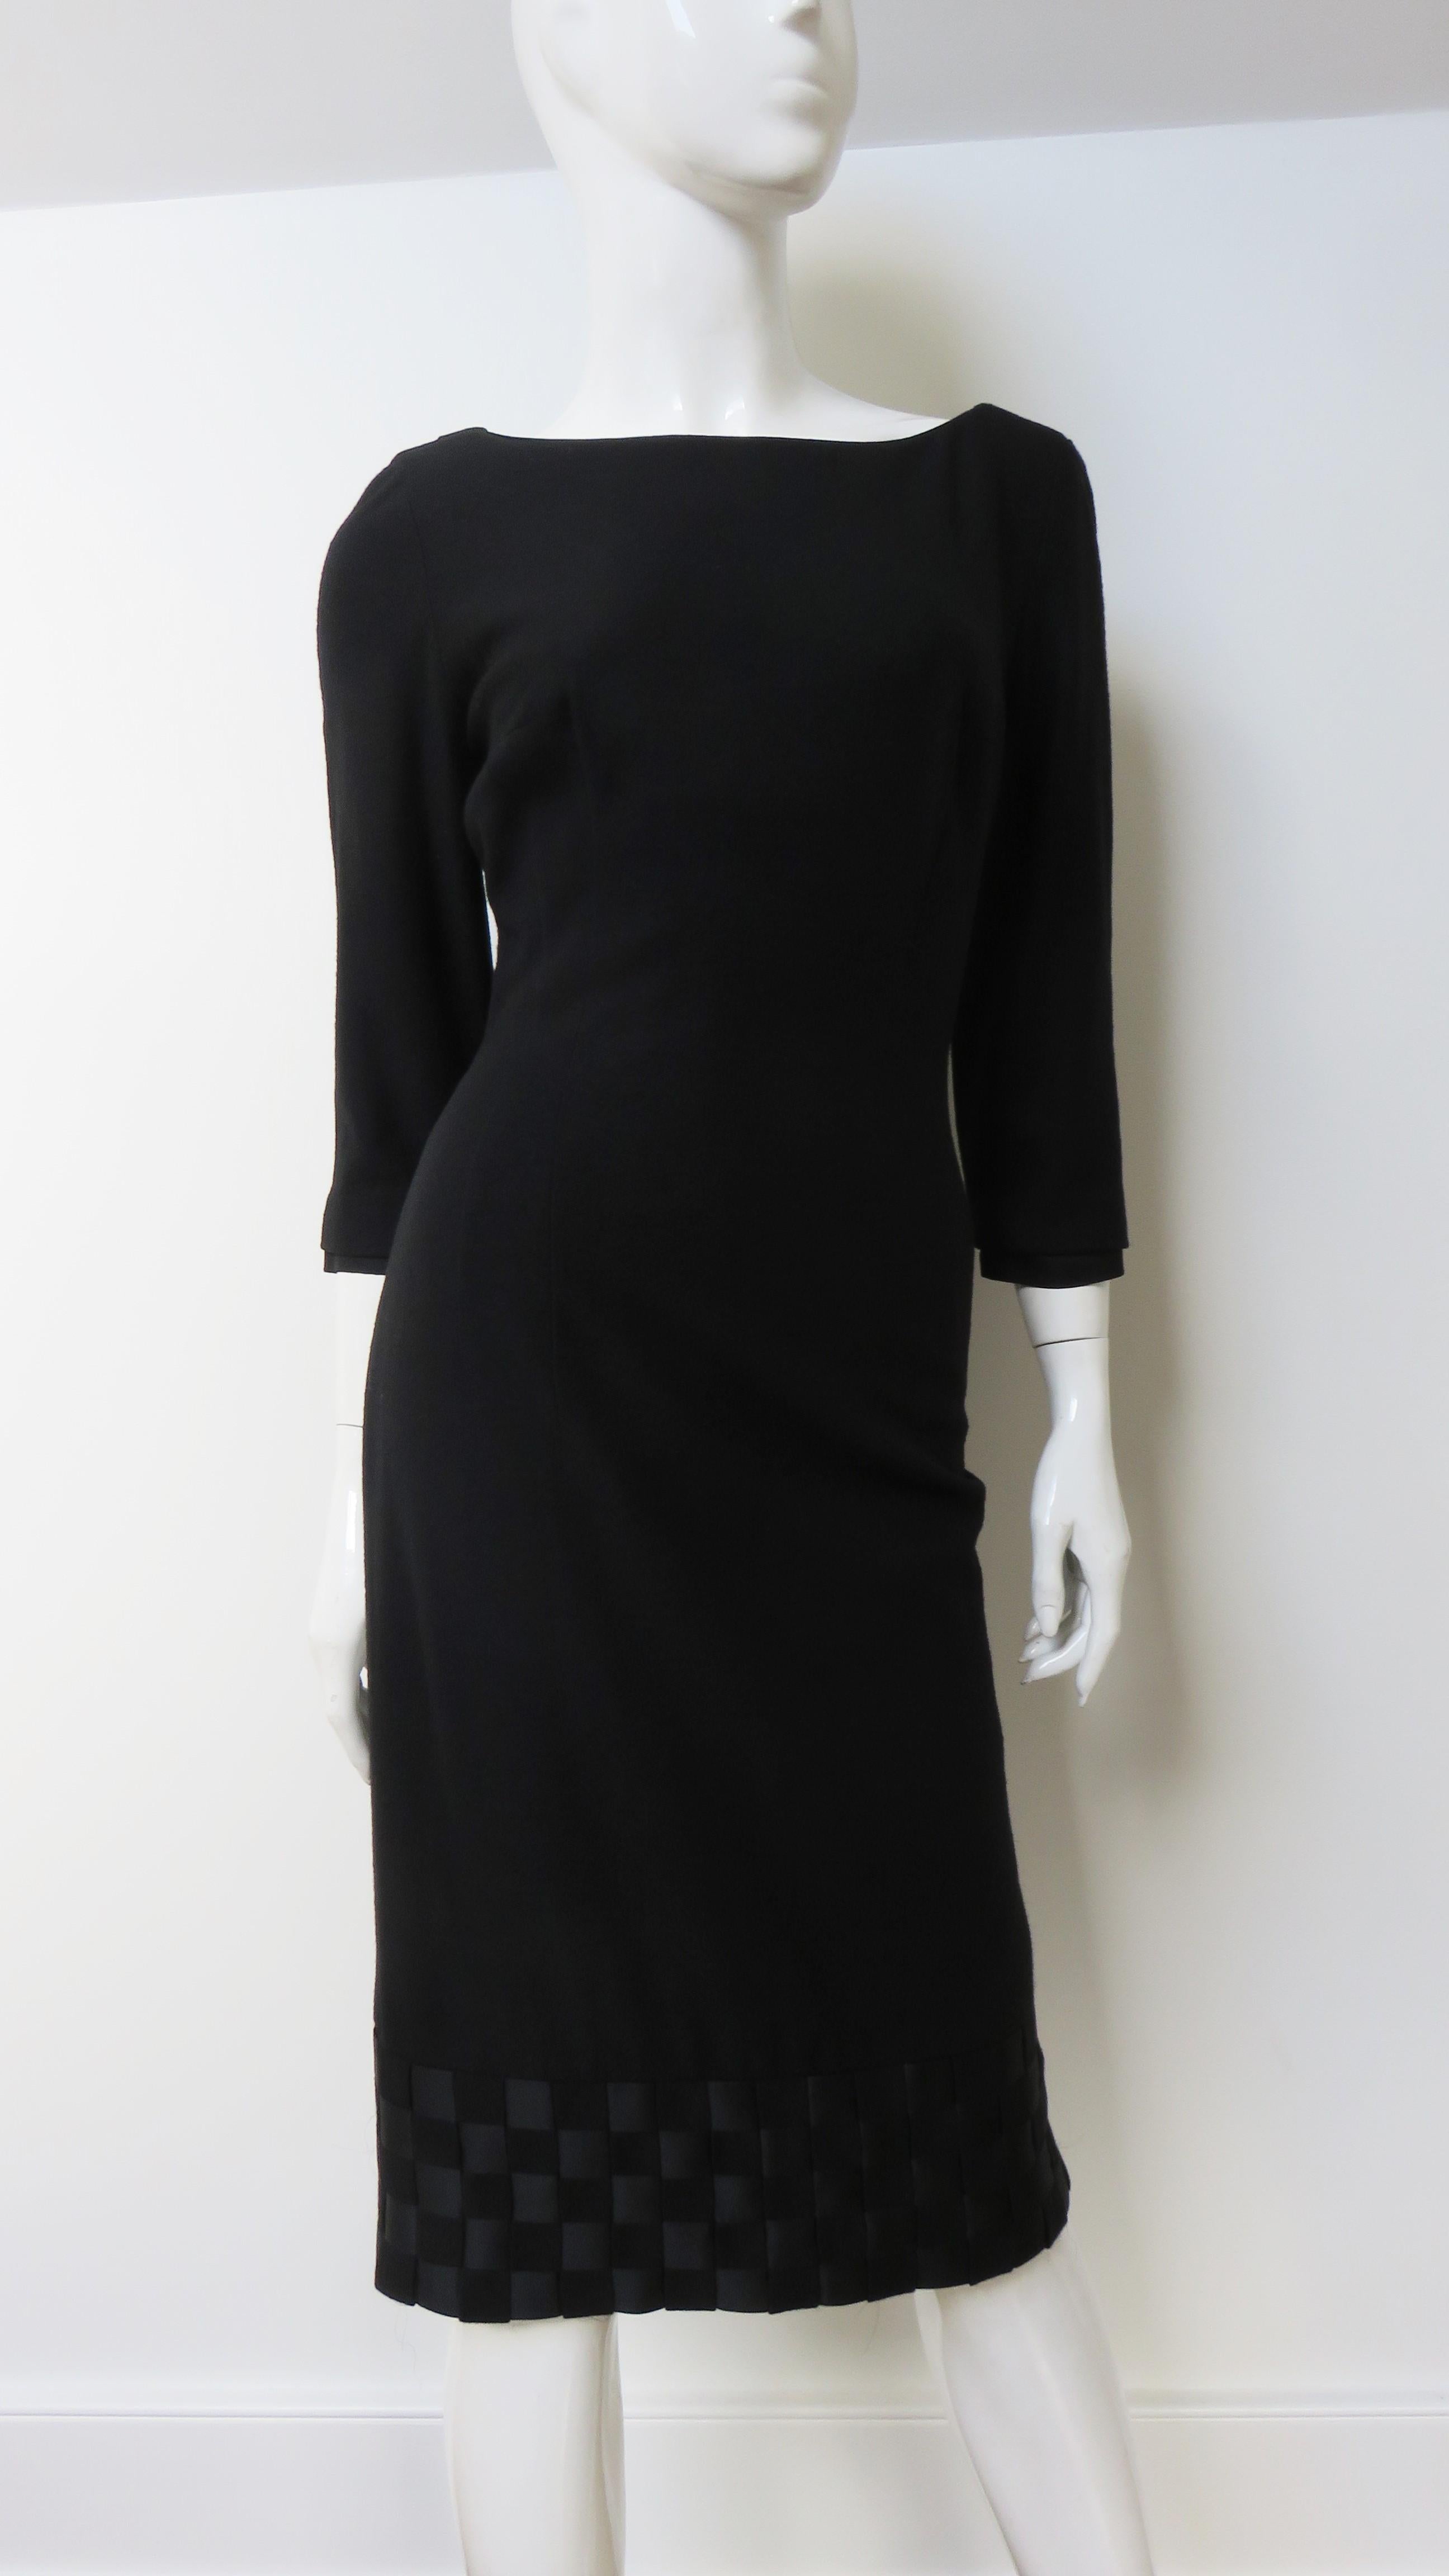 A fabulous black jersey dress by Mr. Blackwell.  It is a semi fitted sheath with 3/4 length sleeves and a collar that dips lower in the back.  The collar and 5